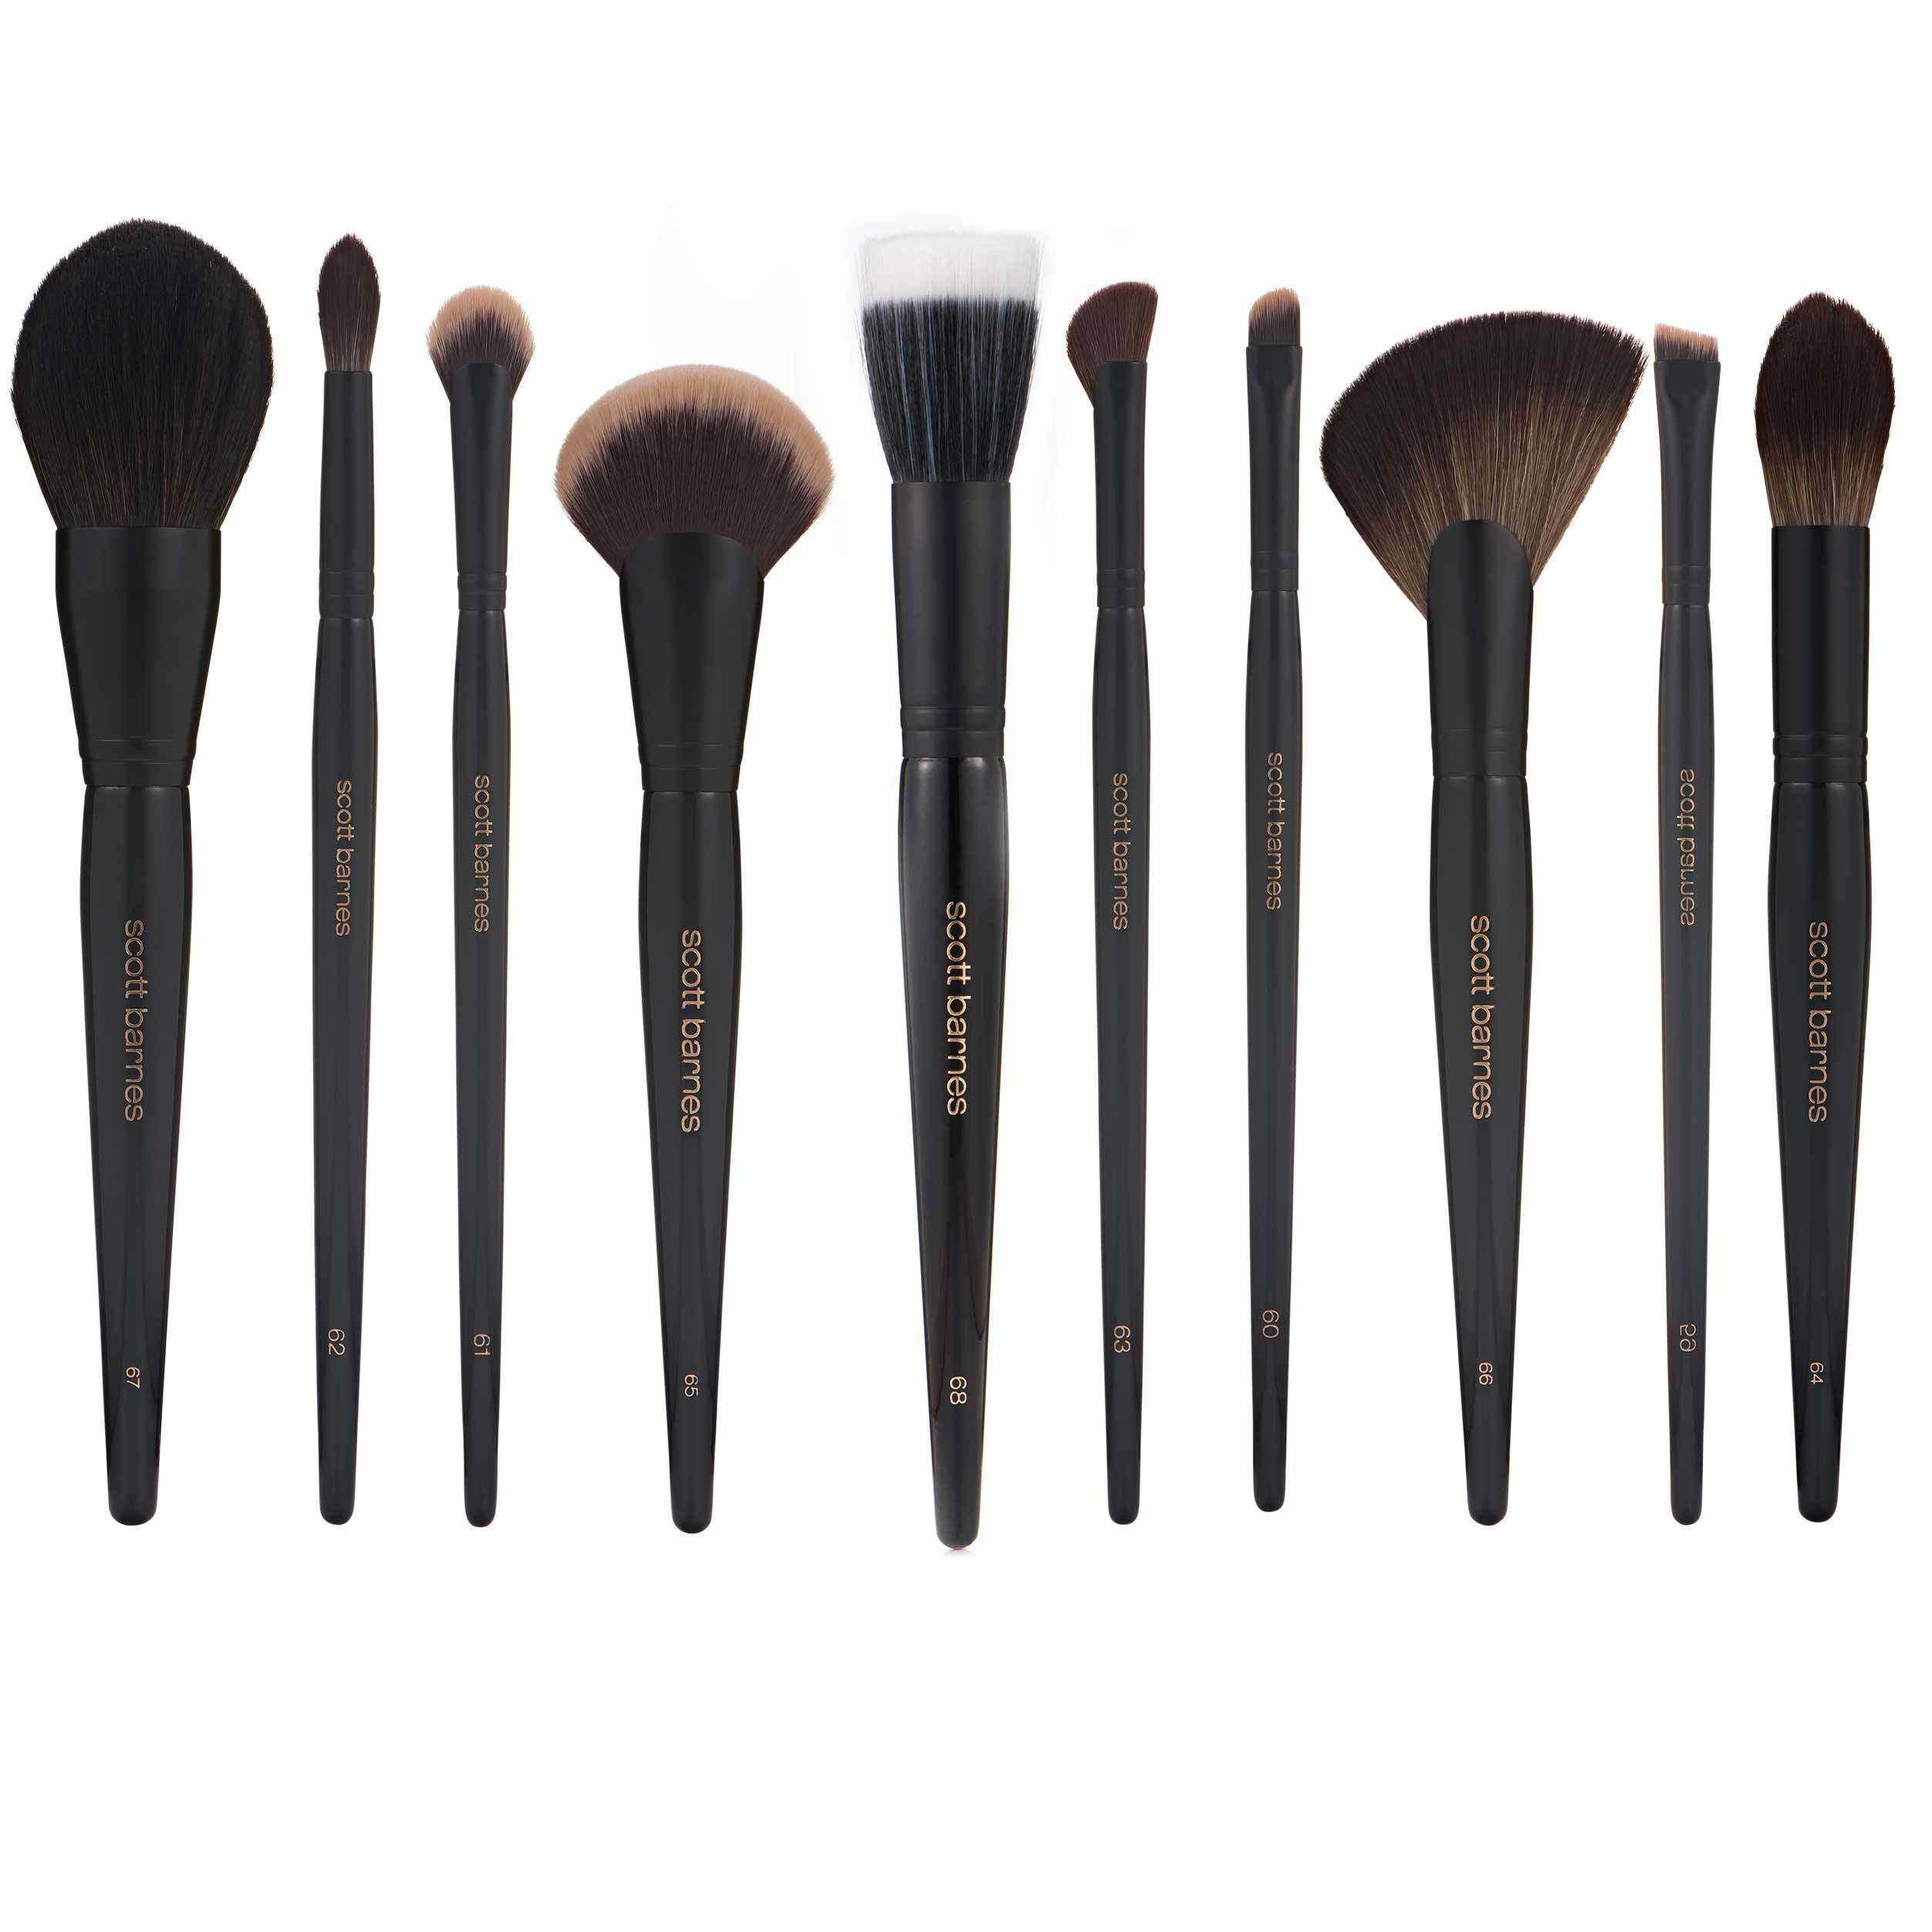 Image of The Complete Pro Series Set - 10 Brushes